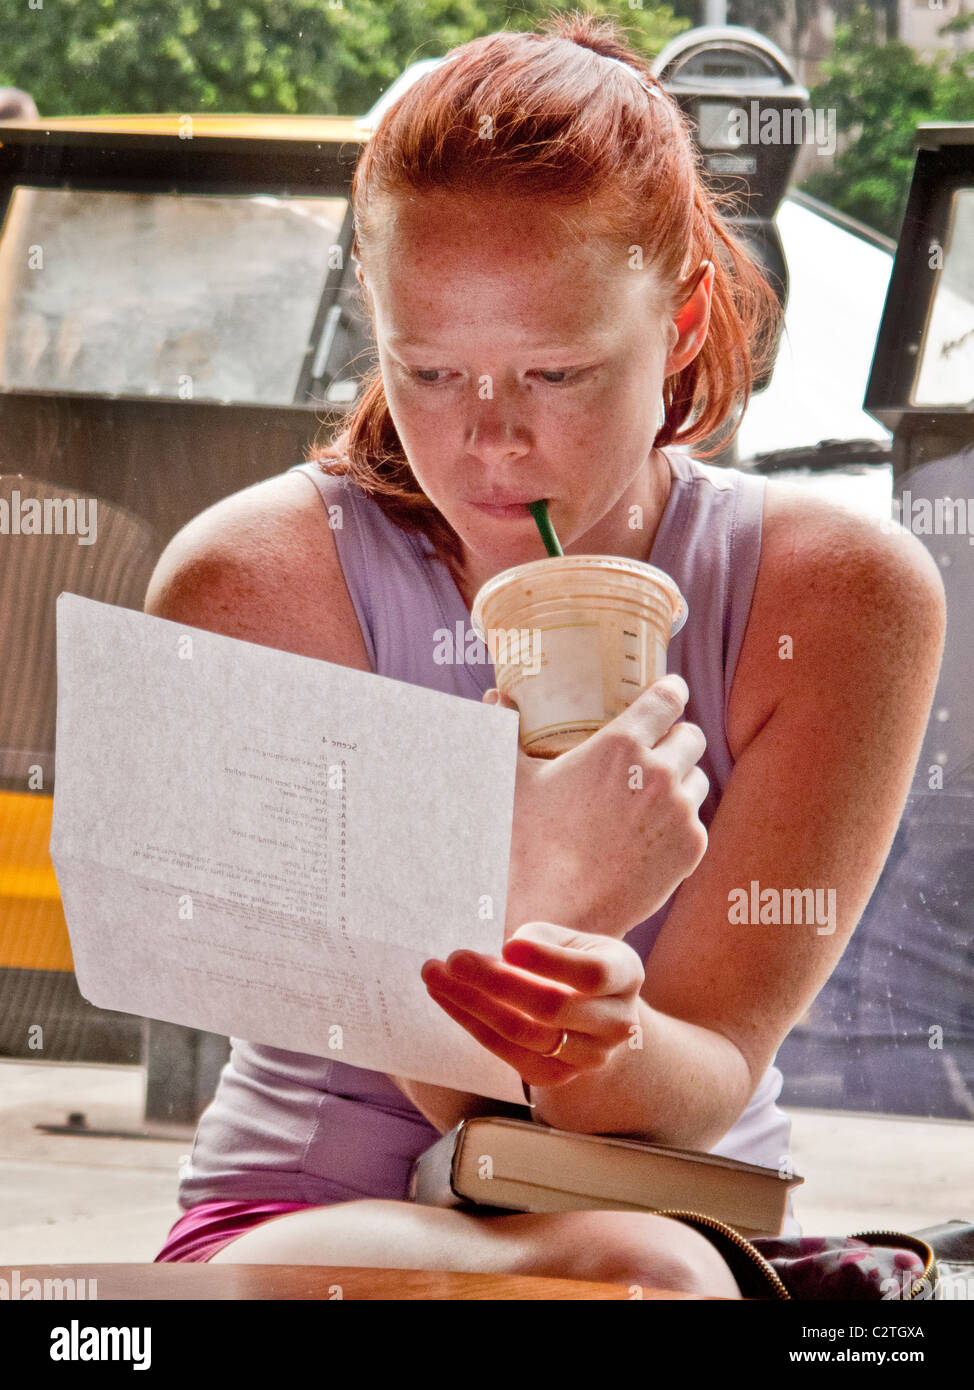 While drinking iced coffee, a young woman reads a college assignment intently at a bookstore in Santa Monica, CA. Stock Photo